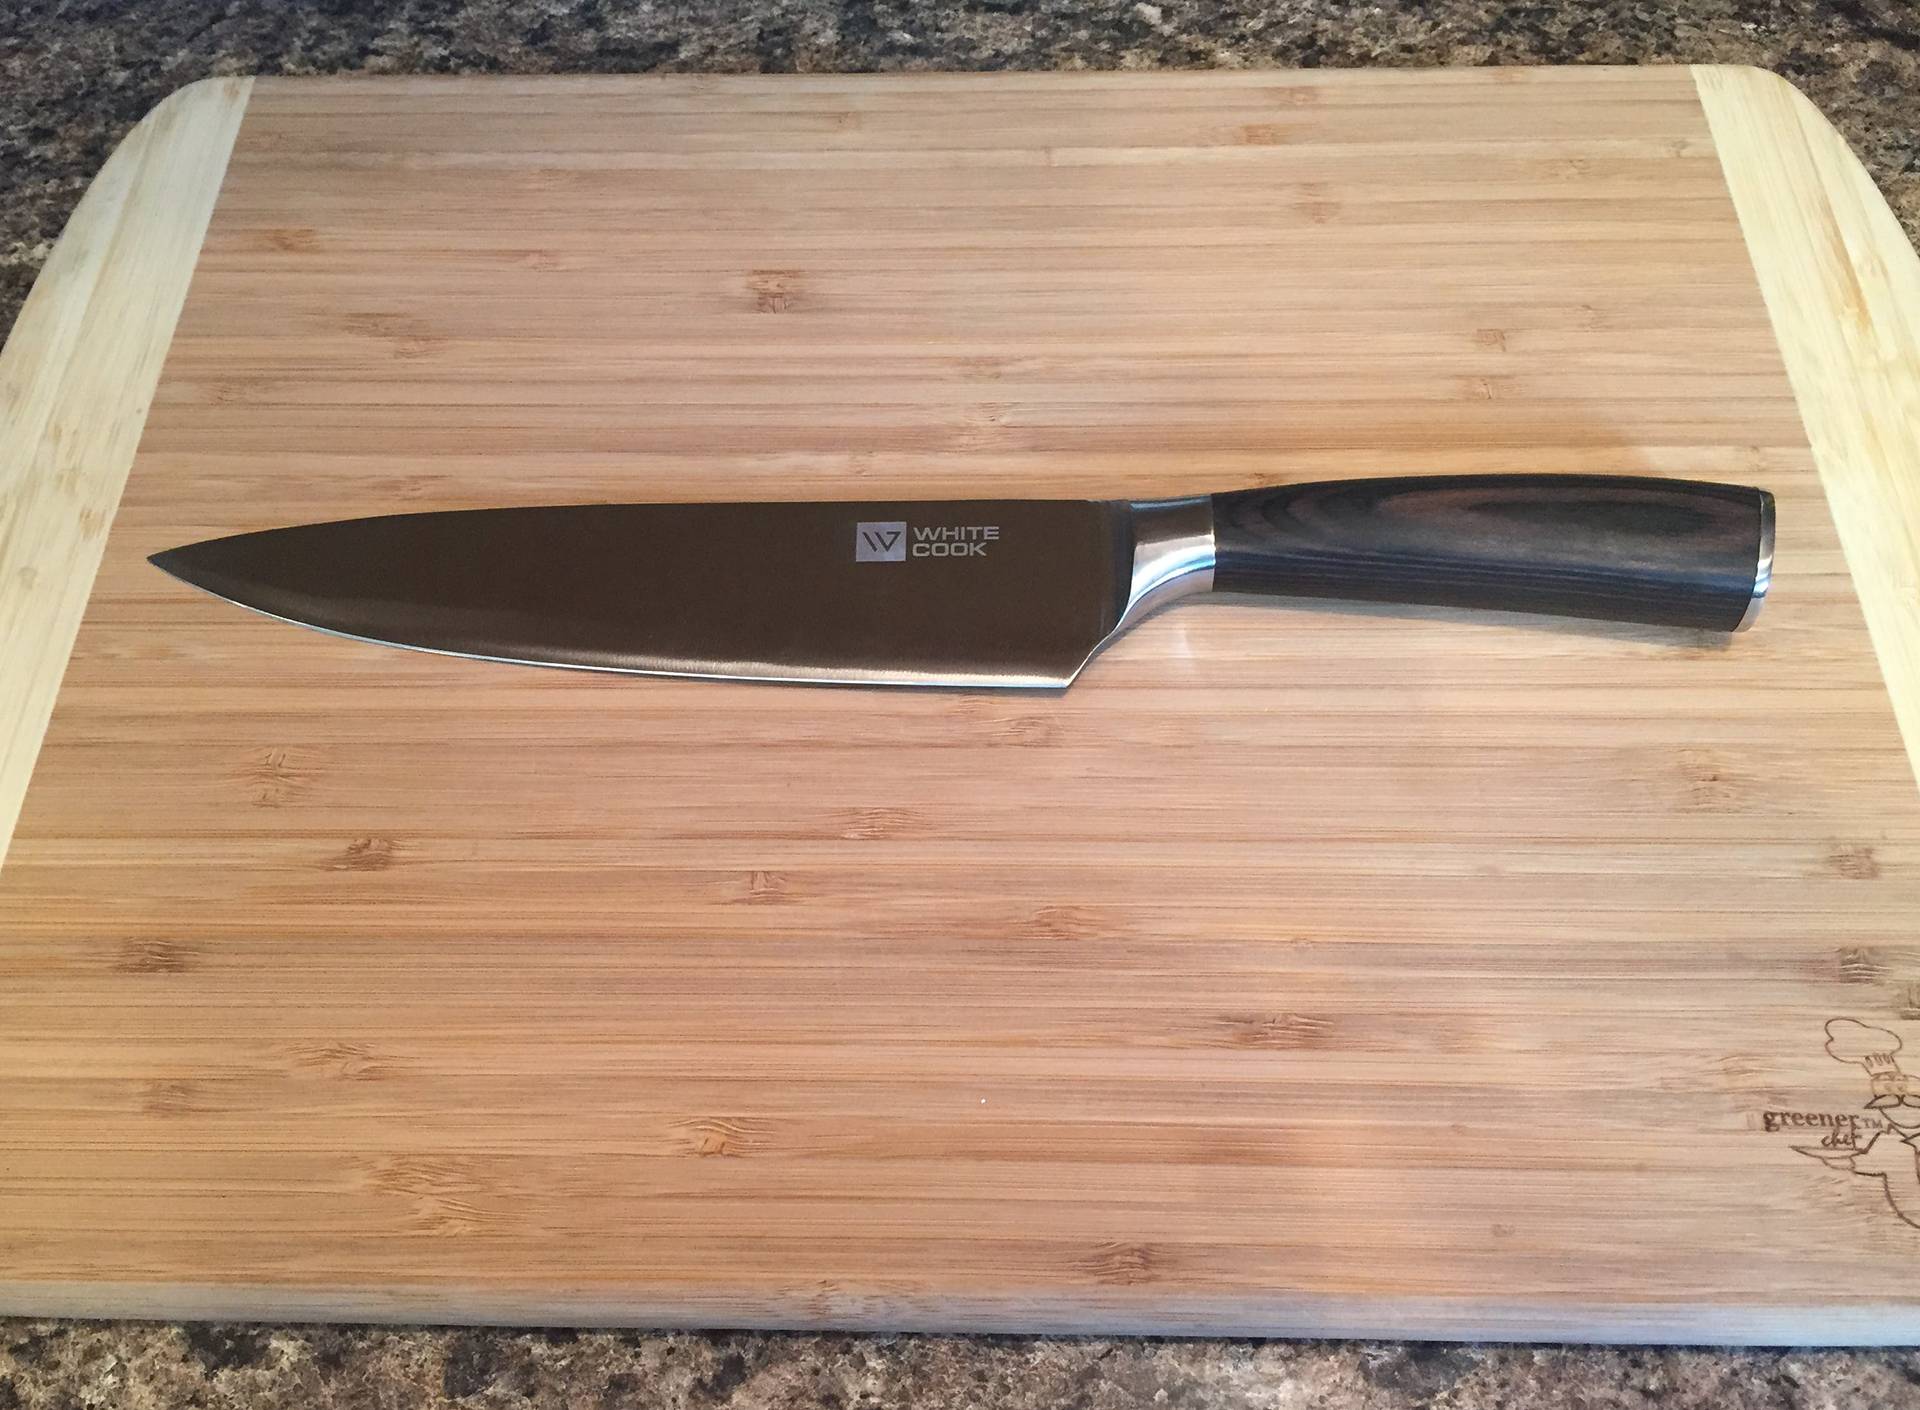 Victorinox Fibrox Pro Chef's Knife Review: Handles Any Task